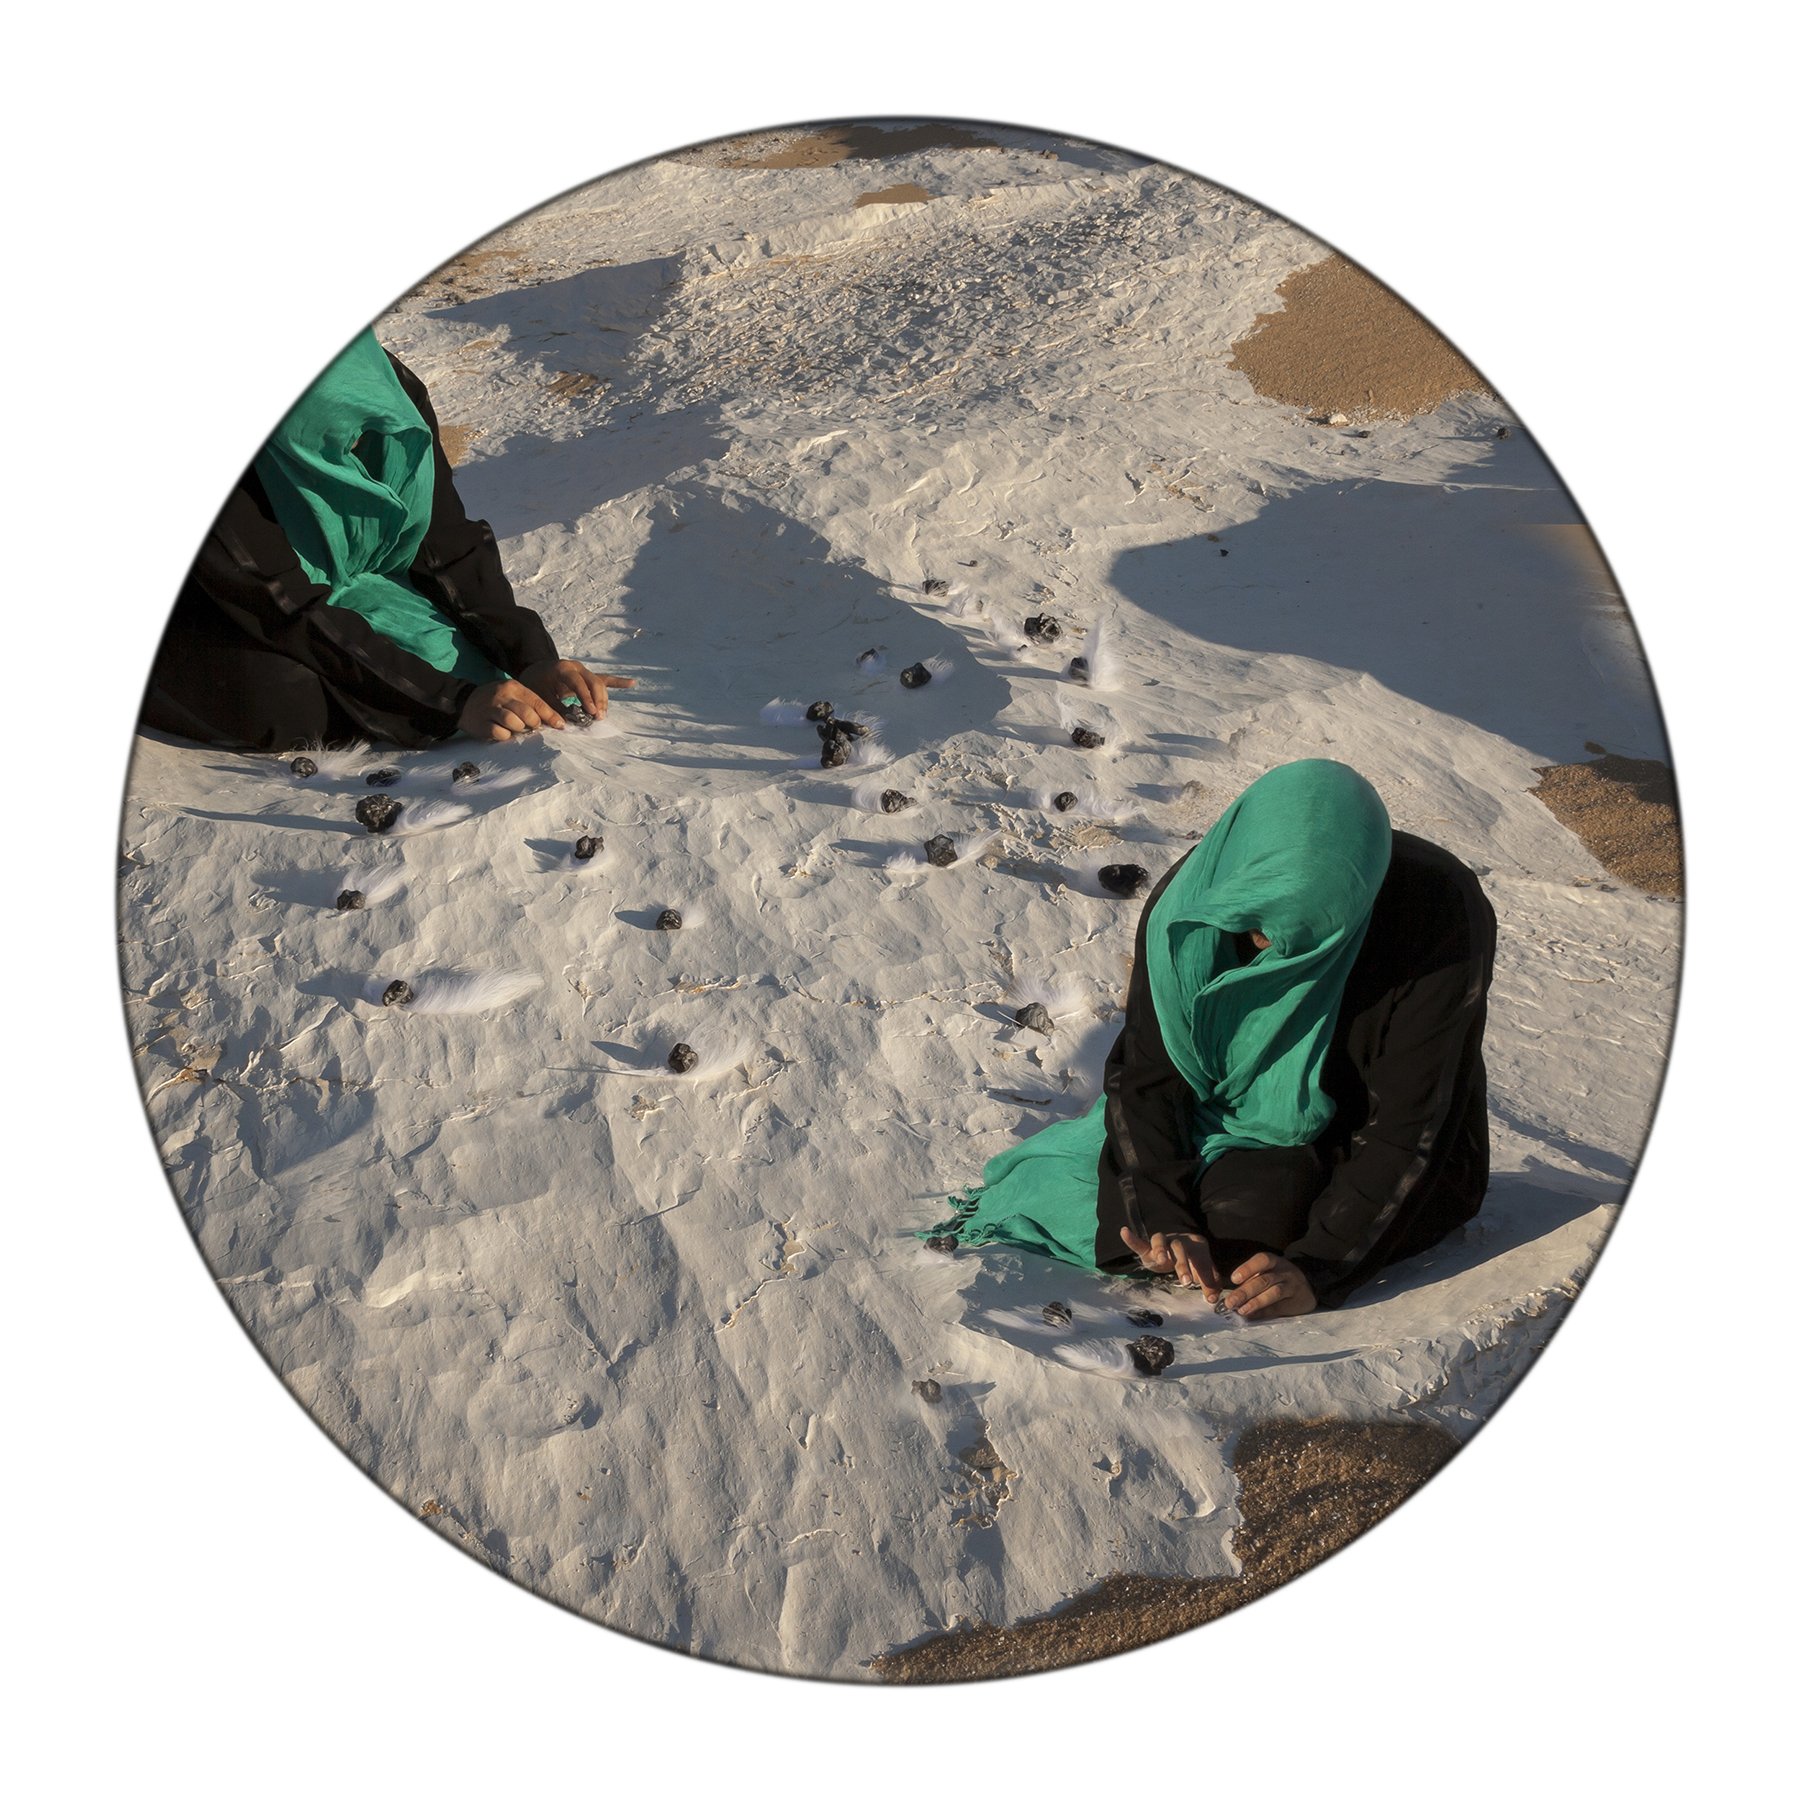  Sama Alshaibi,   Al-Maʿna al-Thalith   (The third meaning), from the series Silsila, 2014  Chromogenic print mounted on Diasec, 47 ¼ inches diameter  courtesy of the artist and Ayyam Gallery 